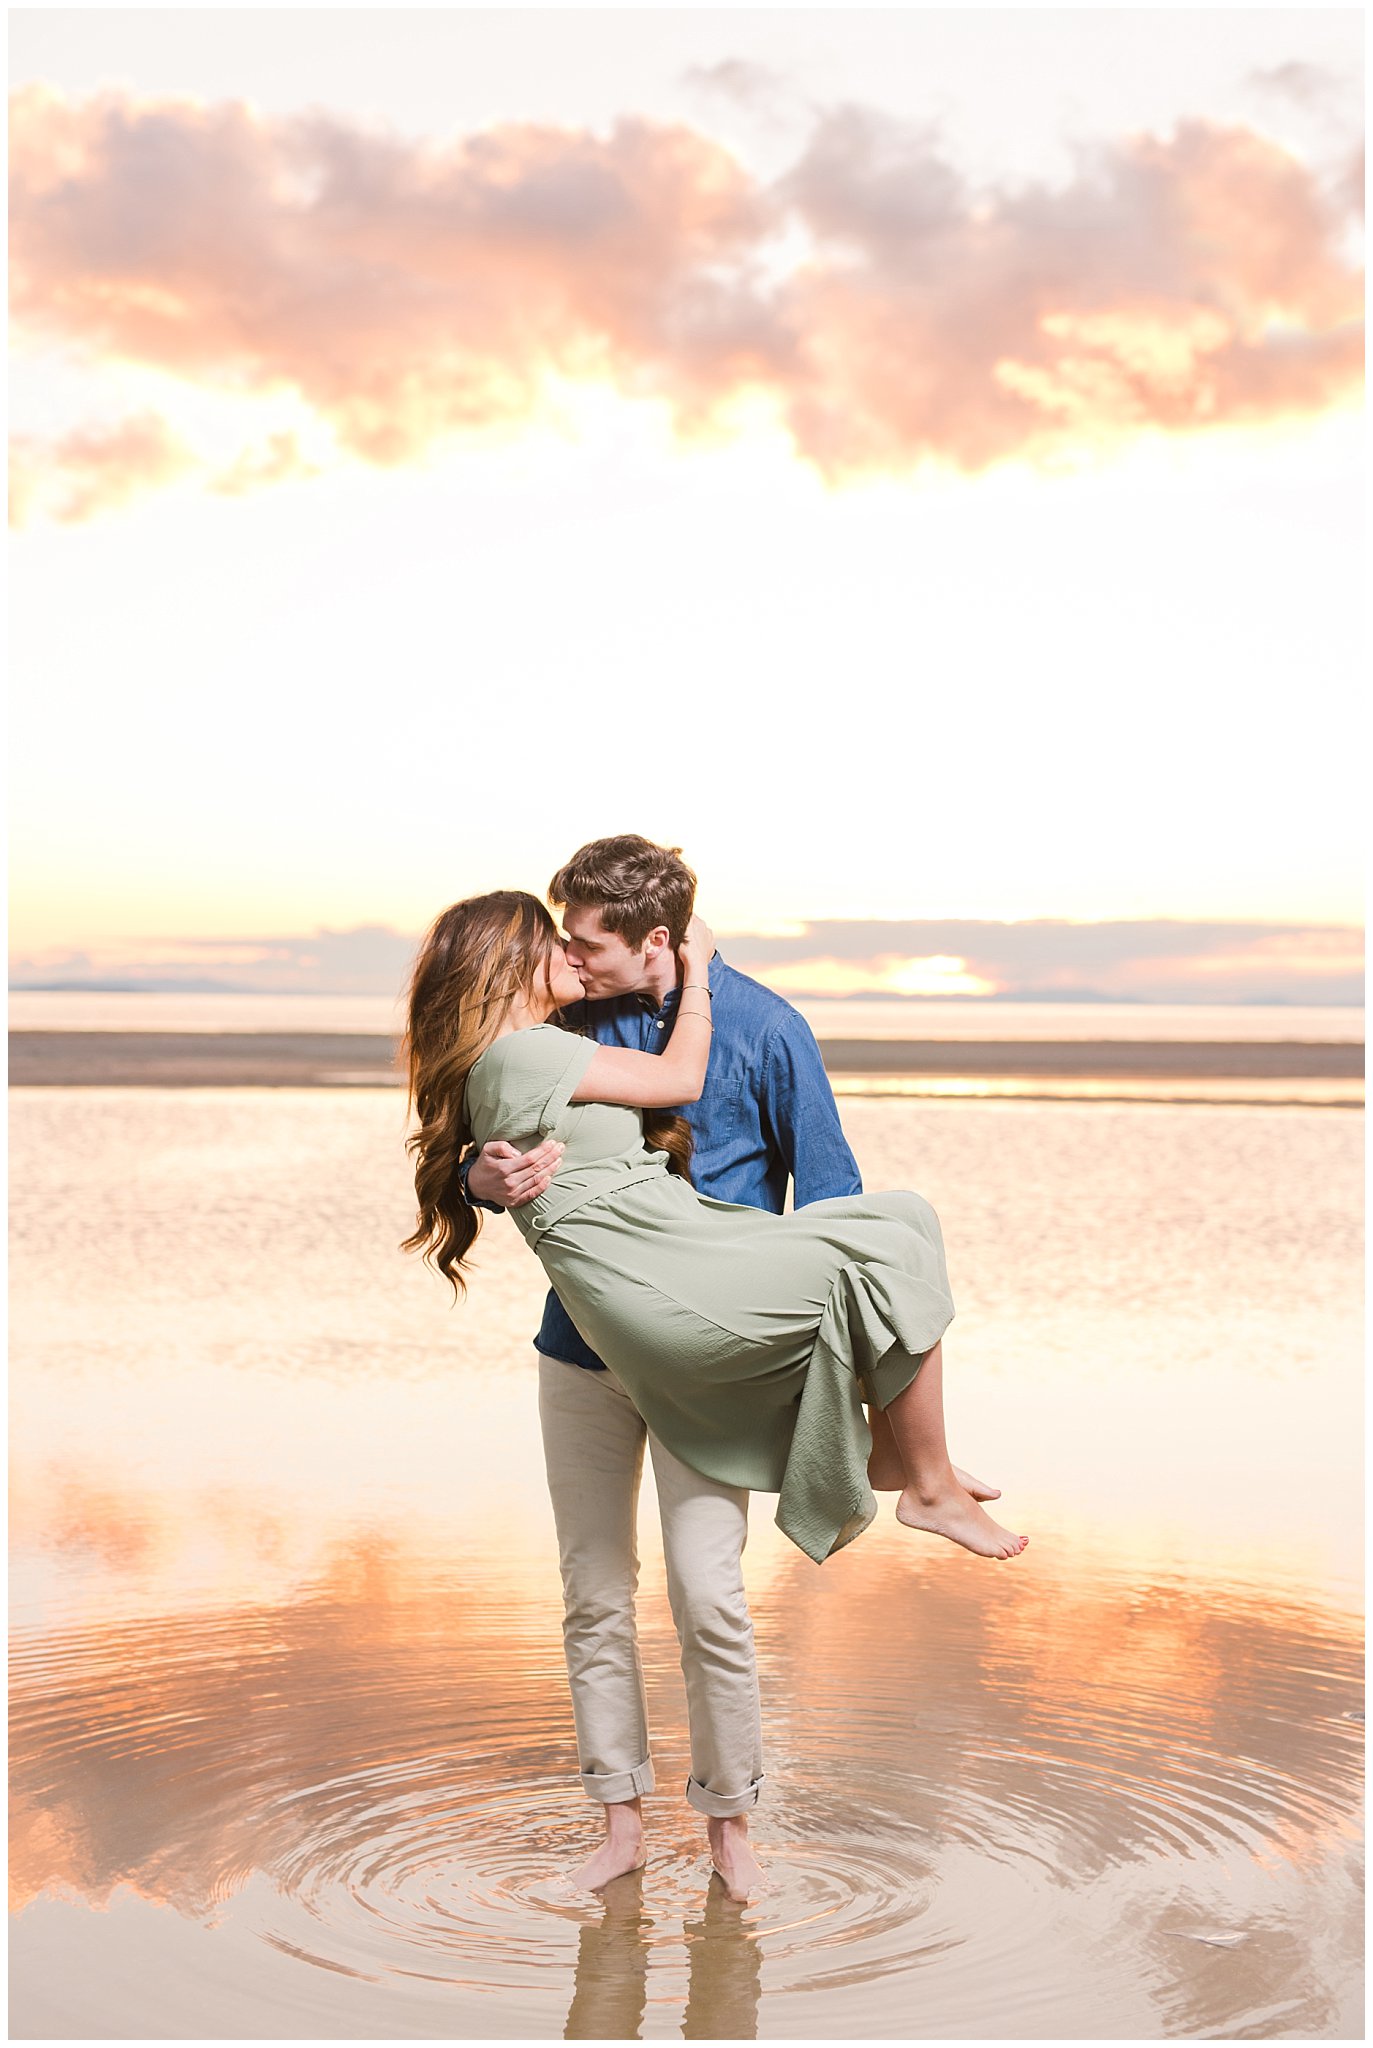 Couple kissing in the water at sunset | Top Utah Wedding and Couples Photos 2019 | Jessie and Dallin Photography